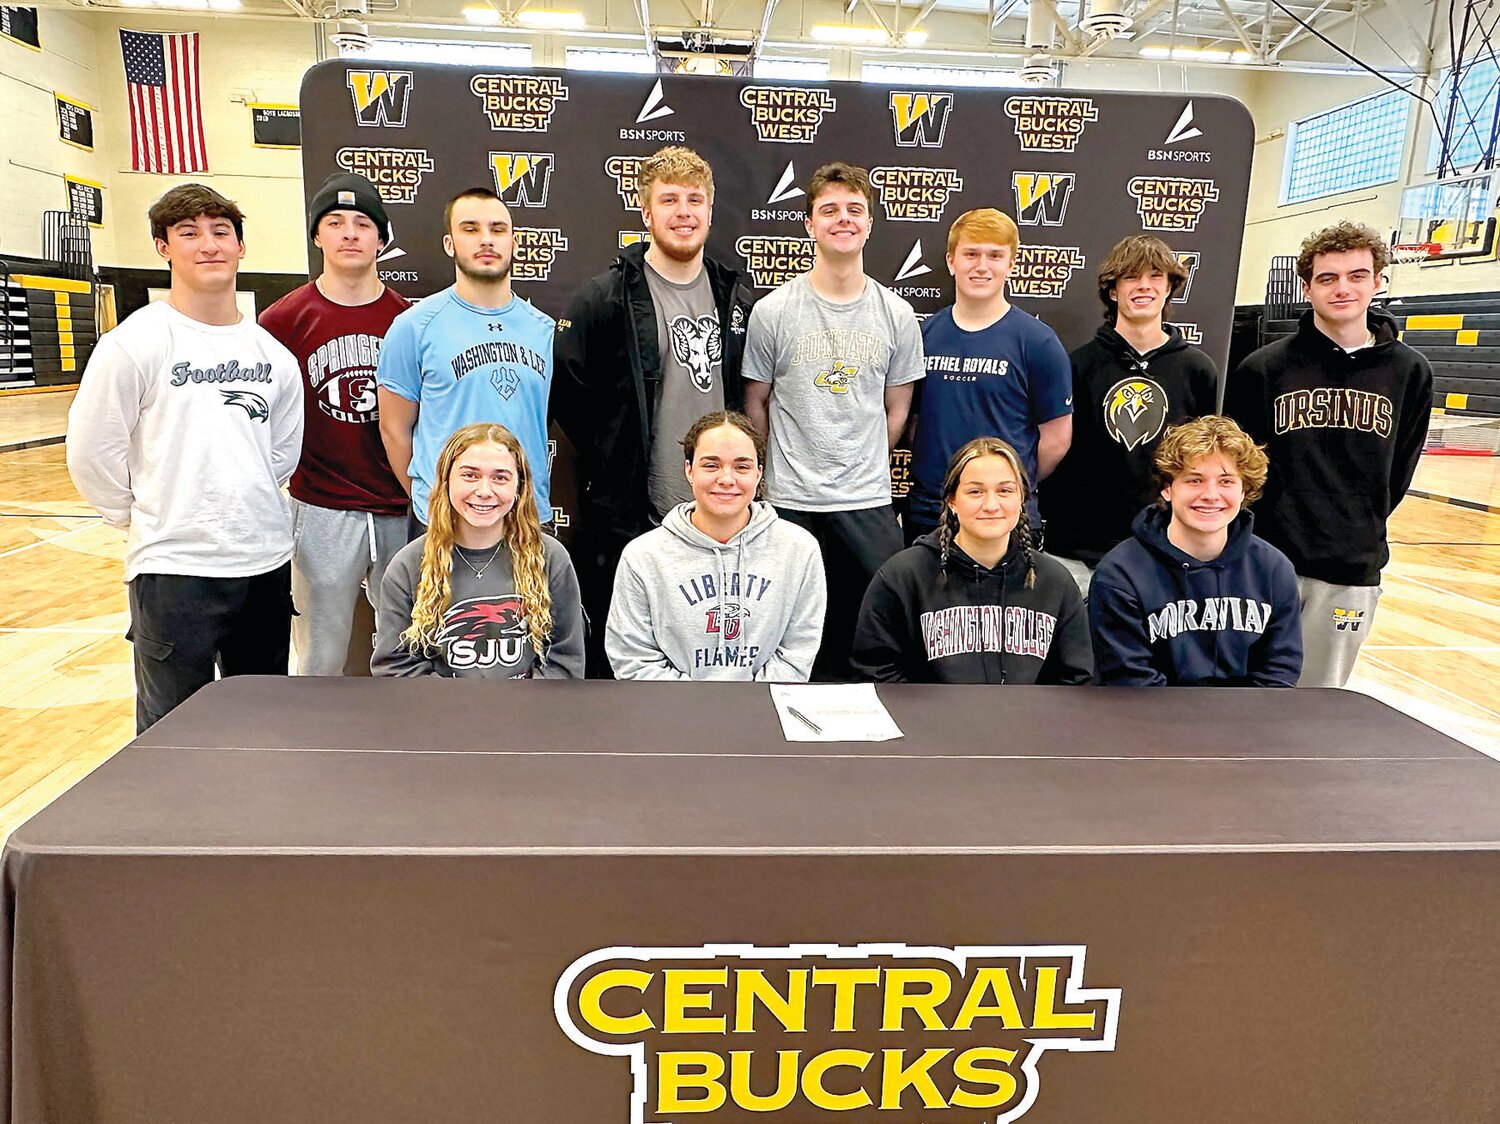 Central Bucks West recognized 12 seniors for their commitment to compete in collegiate sports. From left are: front row, Madelynn Massey, Abby Rogers, Molly Gross, Jackson Lombardi; standing, Jaden Barone, Jack Fleisher, Cooper Taylor, Hayden Mulligan, Bowen Gugger, Griffin Blokker, Richard Newell and Cayden Wertz.